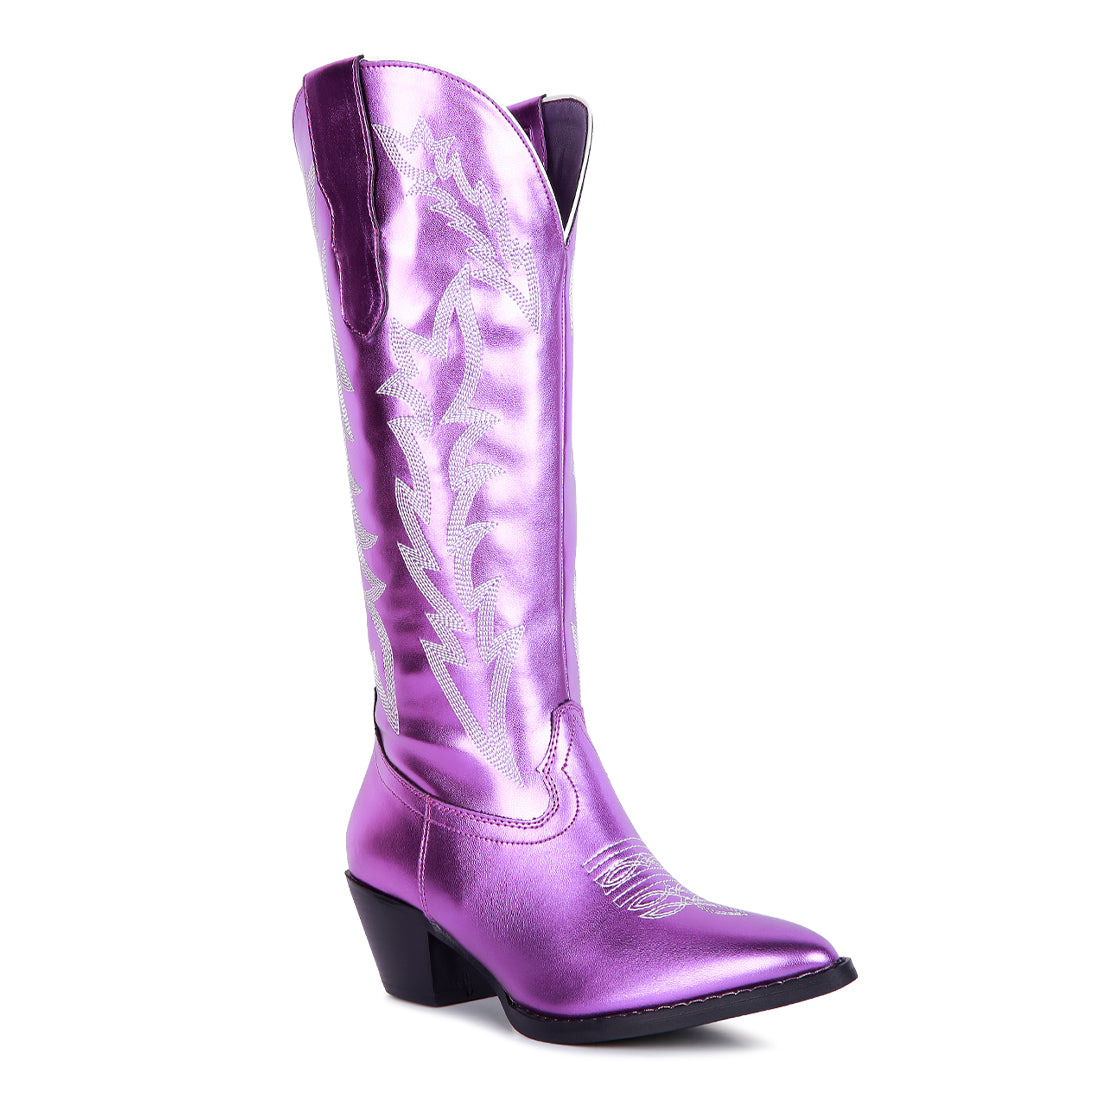 Priscilla Pointed Toe Boot | London Rag India | Reviews on Judge.me